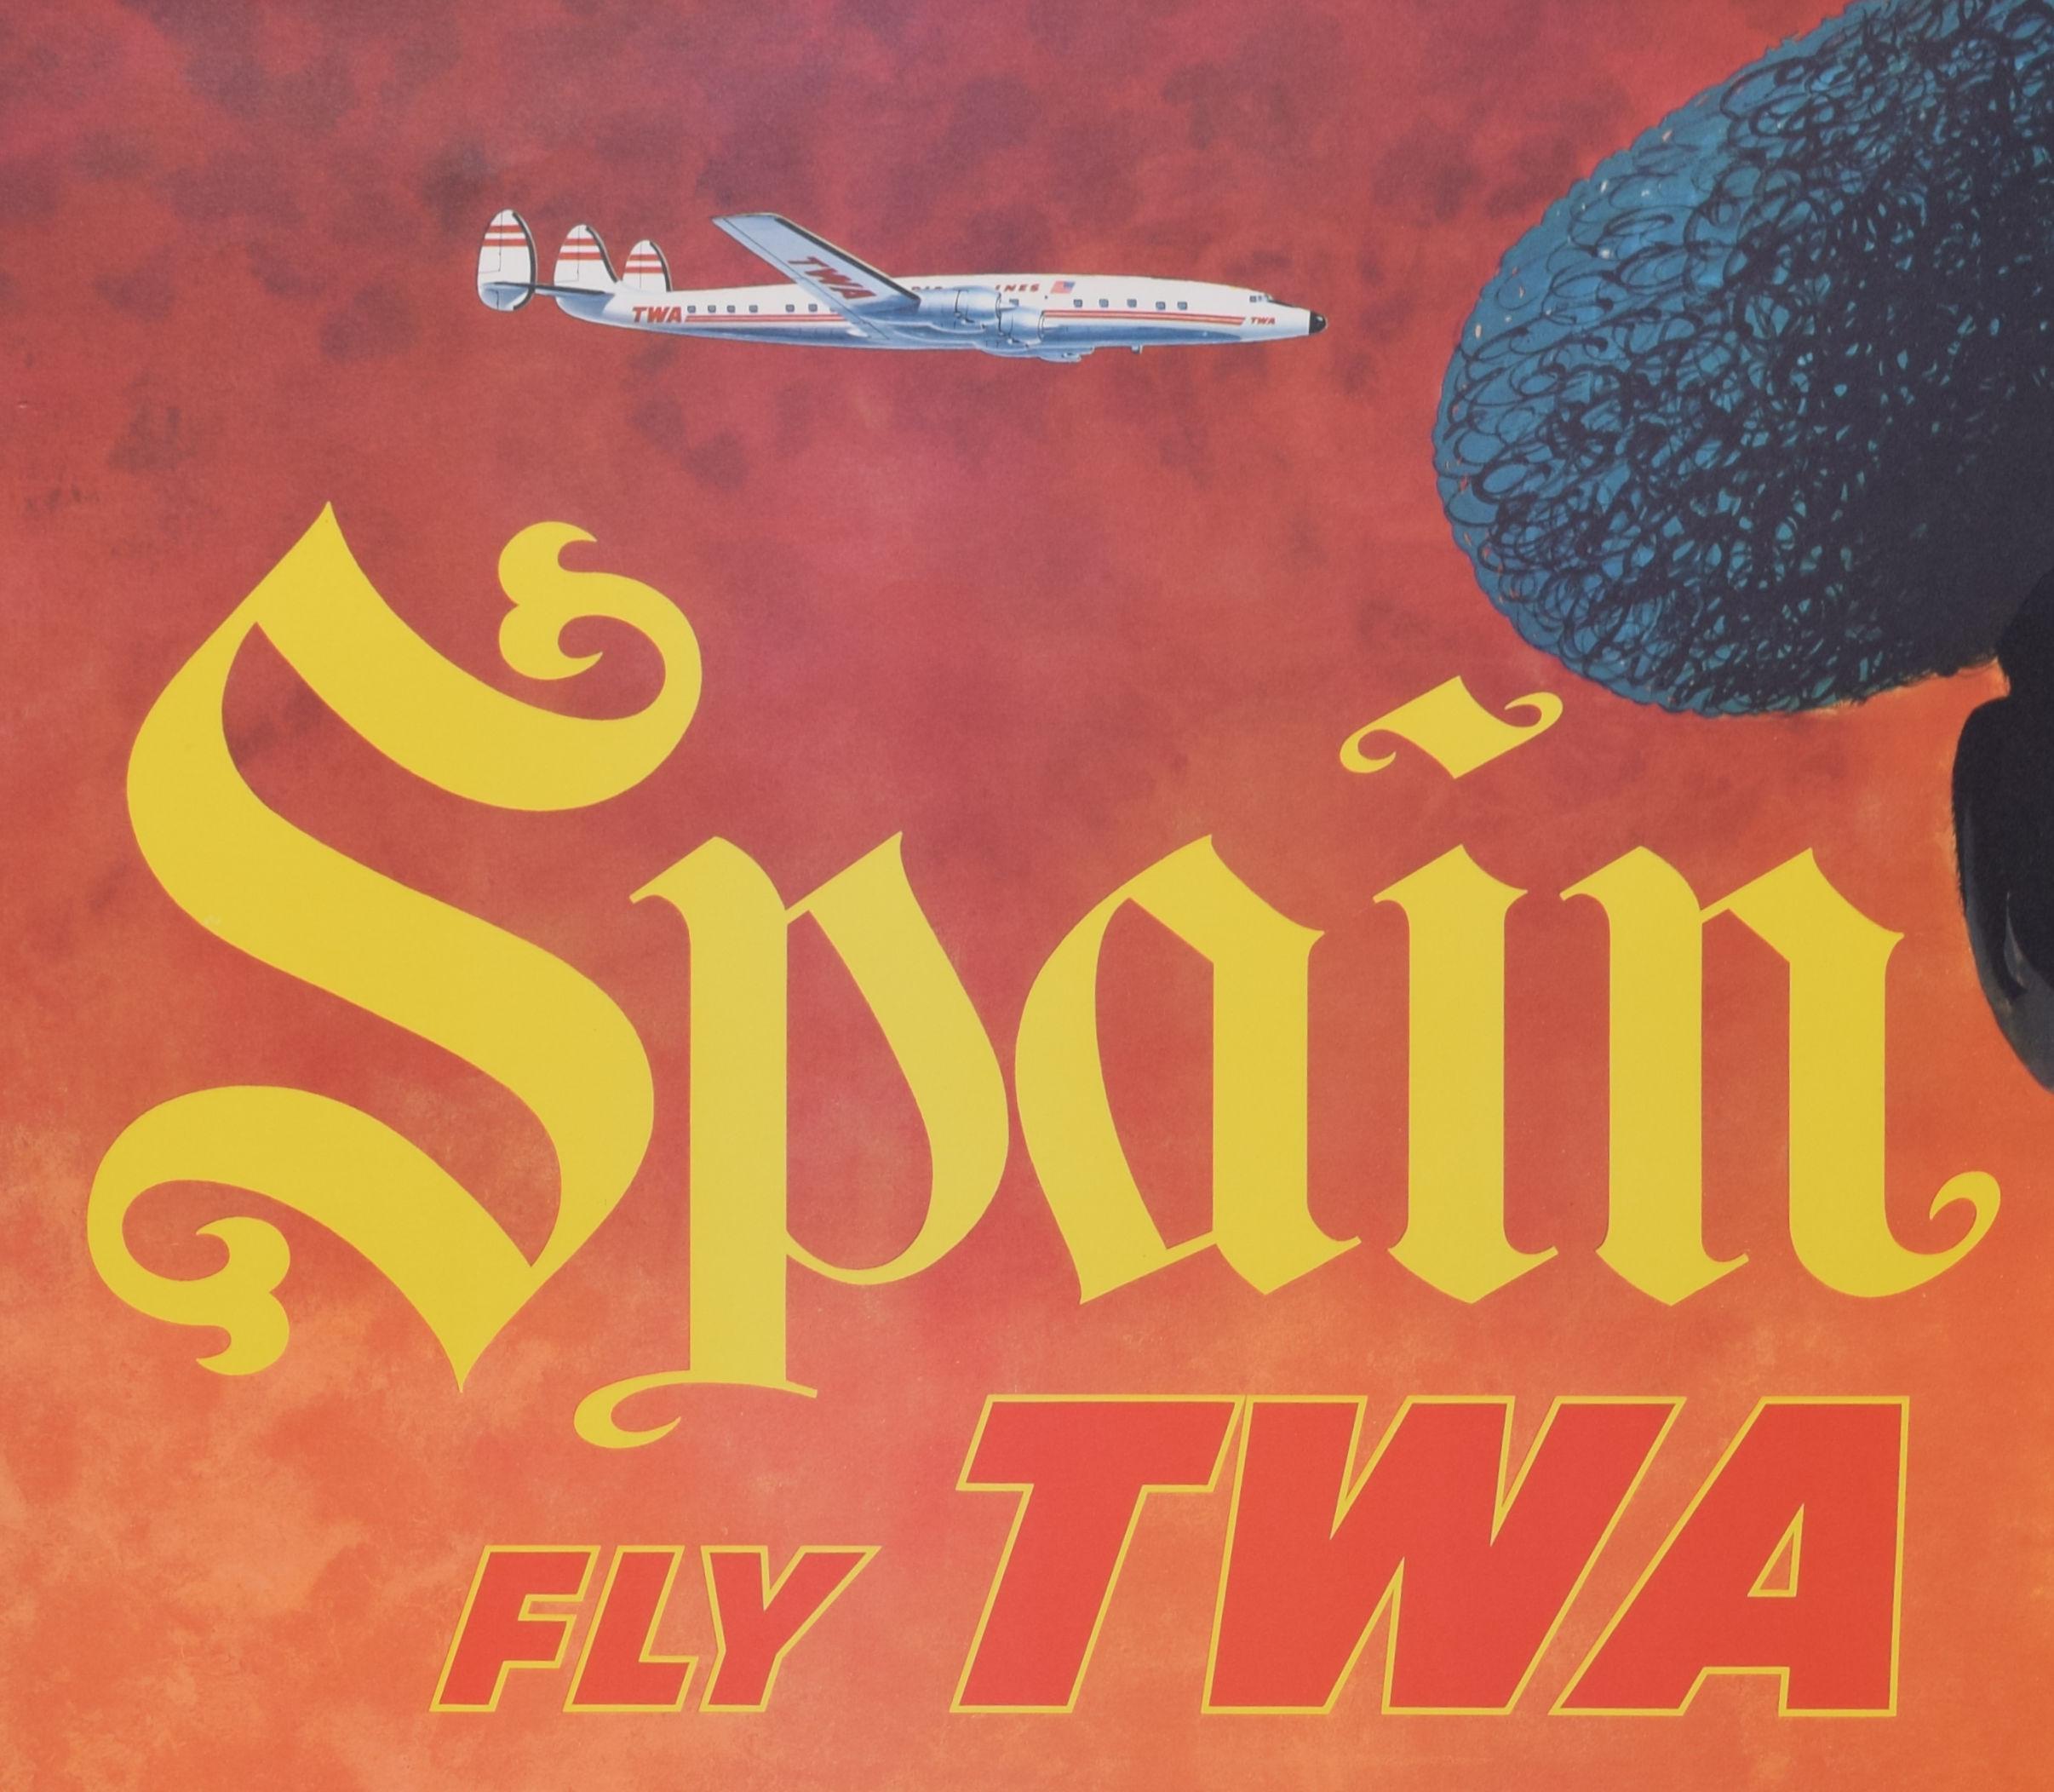 Spain - Fly TWA original vintage travel poster by David Klein For Sale 1